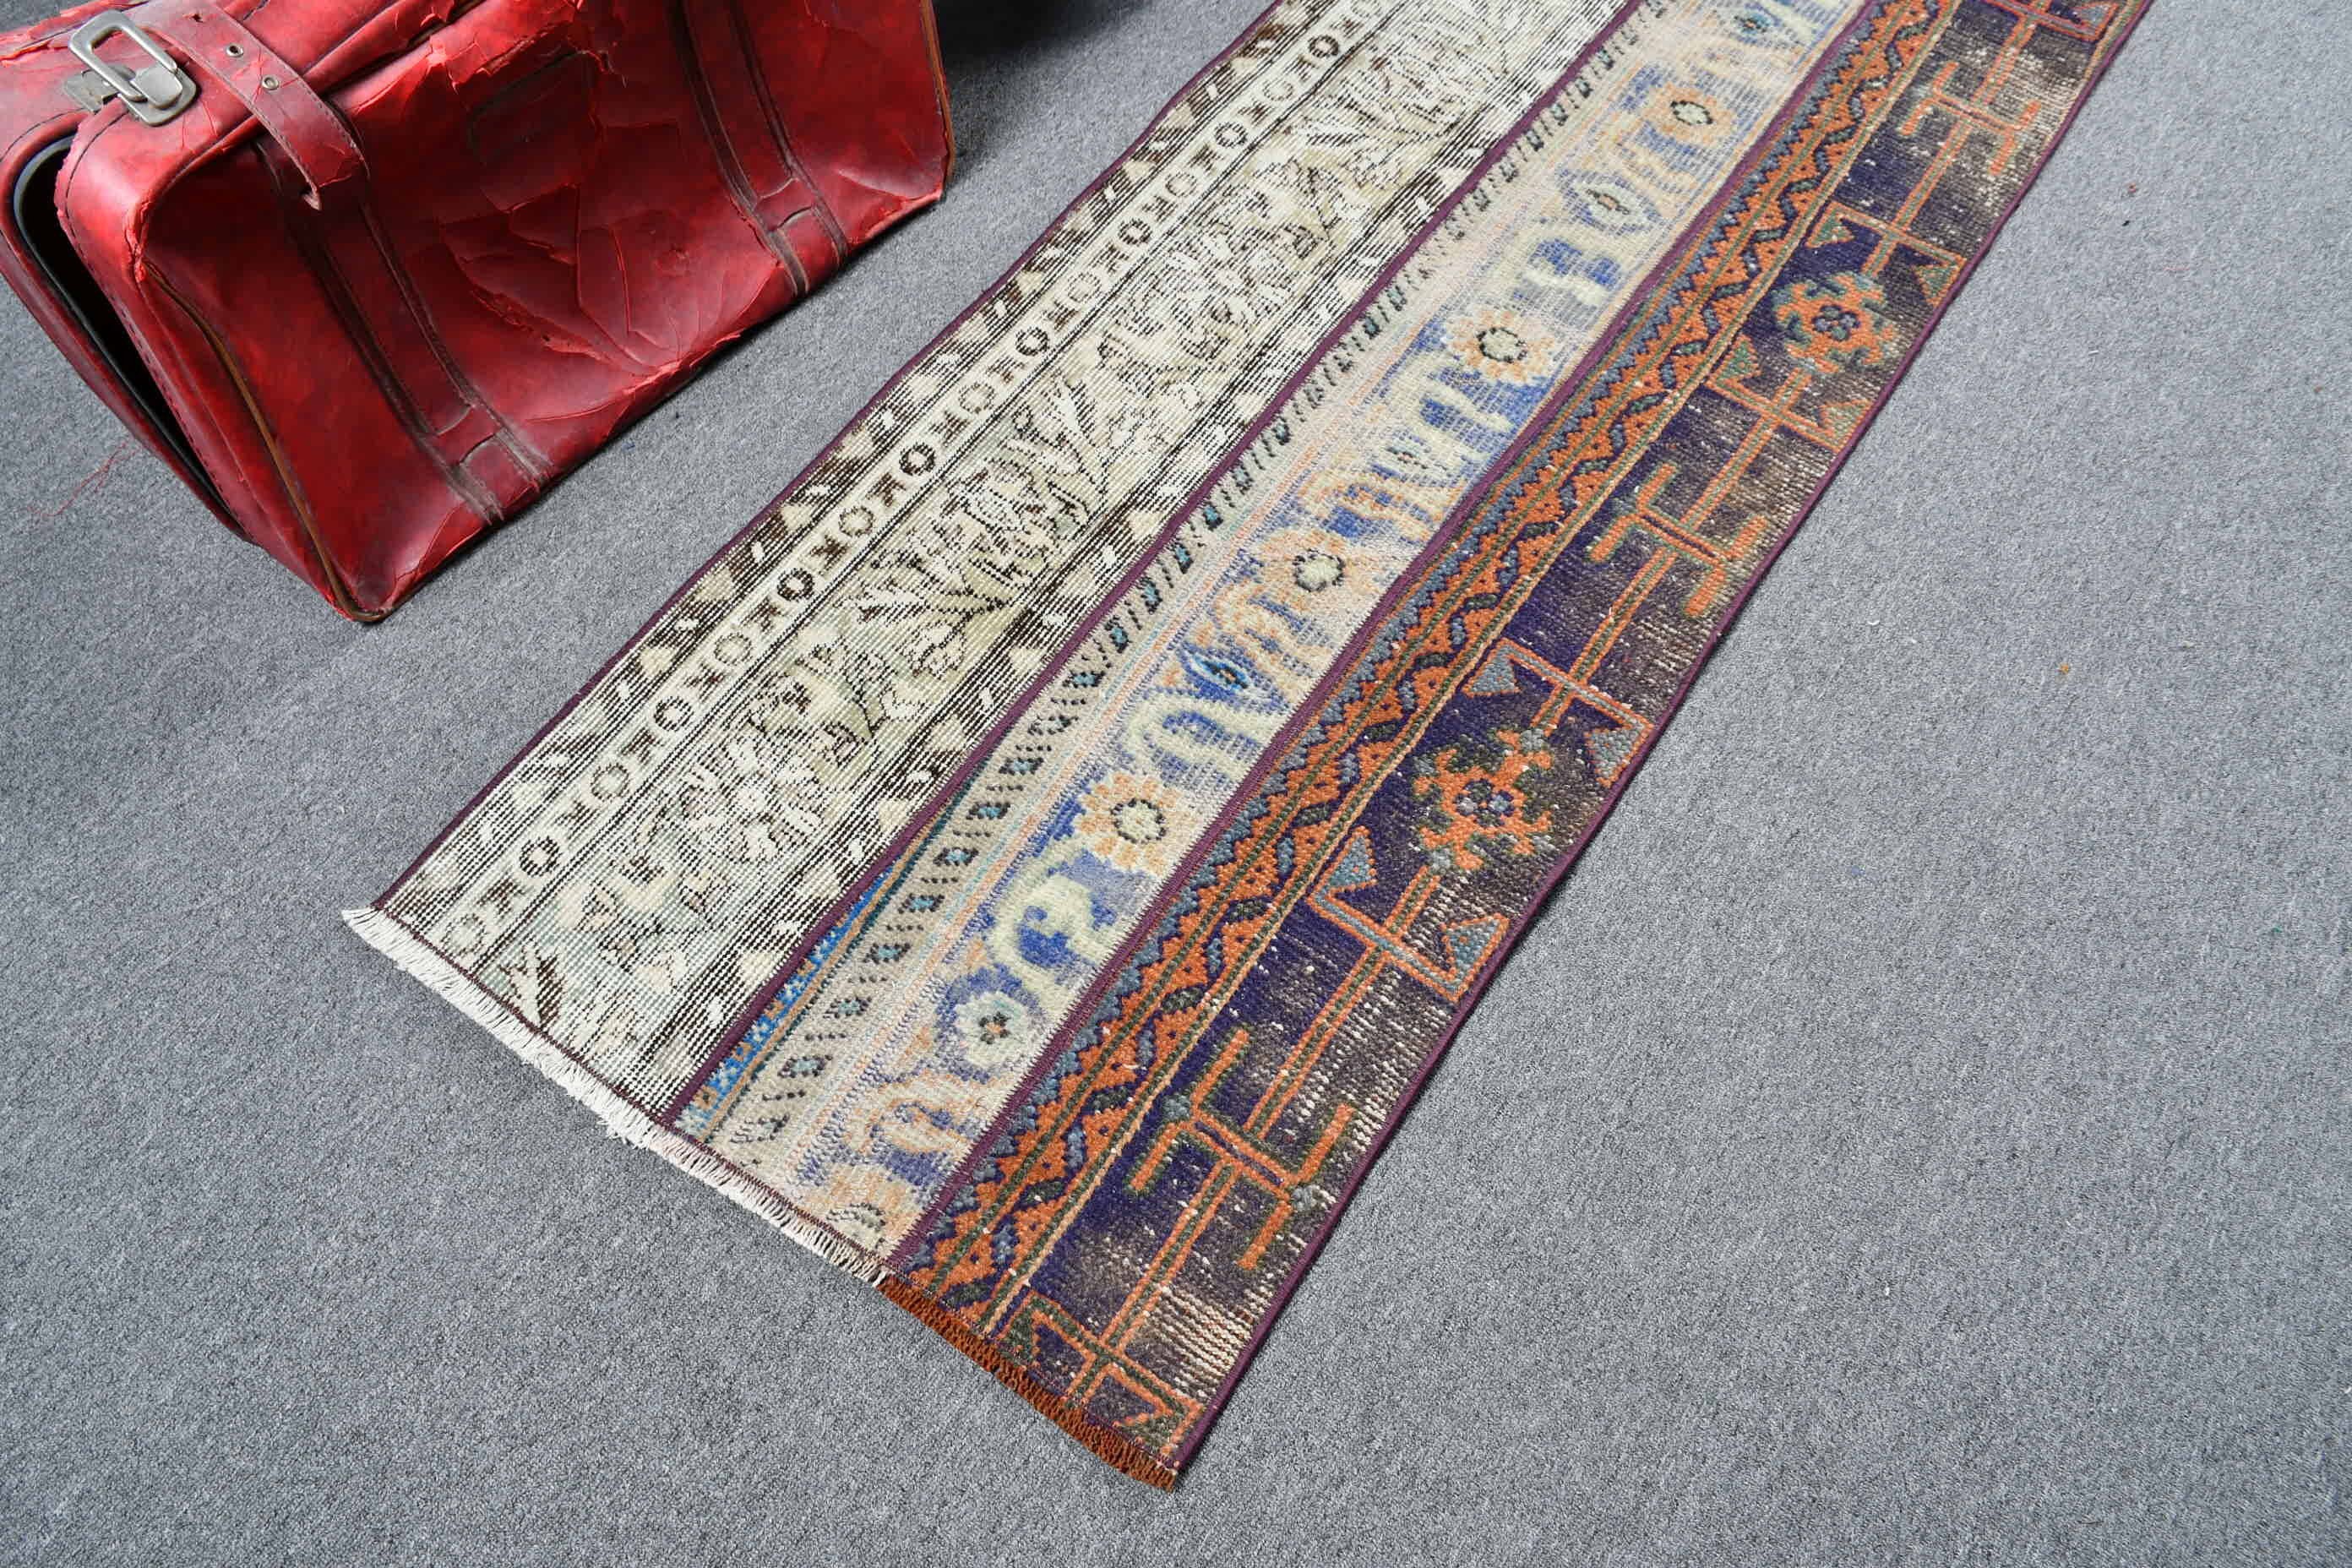 2.2x6.6 ft Runner Rug, Cool Rug, Kitchen Rugs, Anatolian Rugs, Eclectic Rugs, Vintage Rug, Green Anatolian Rug, Turkish Rugs, Stair Rugs